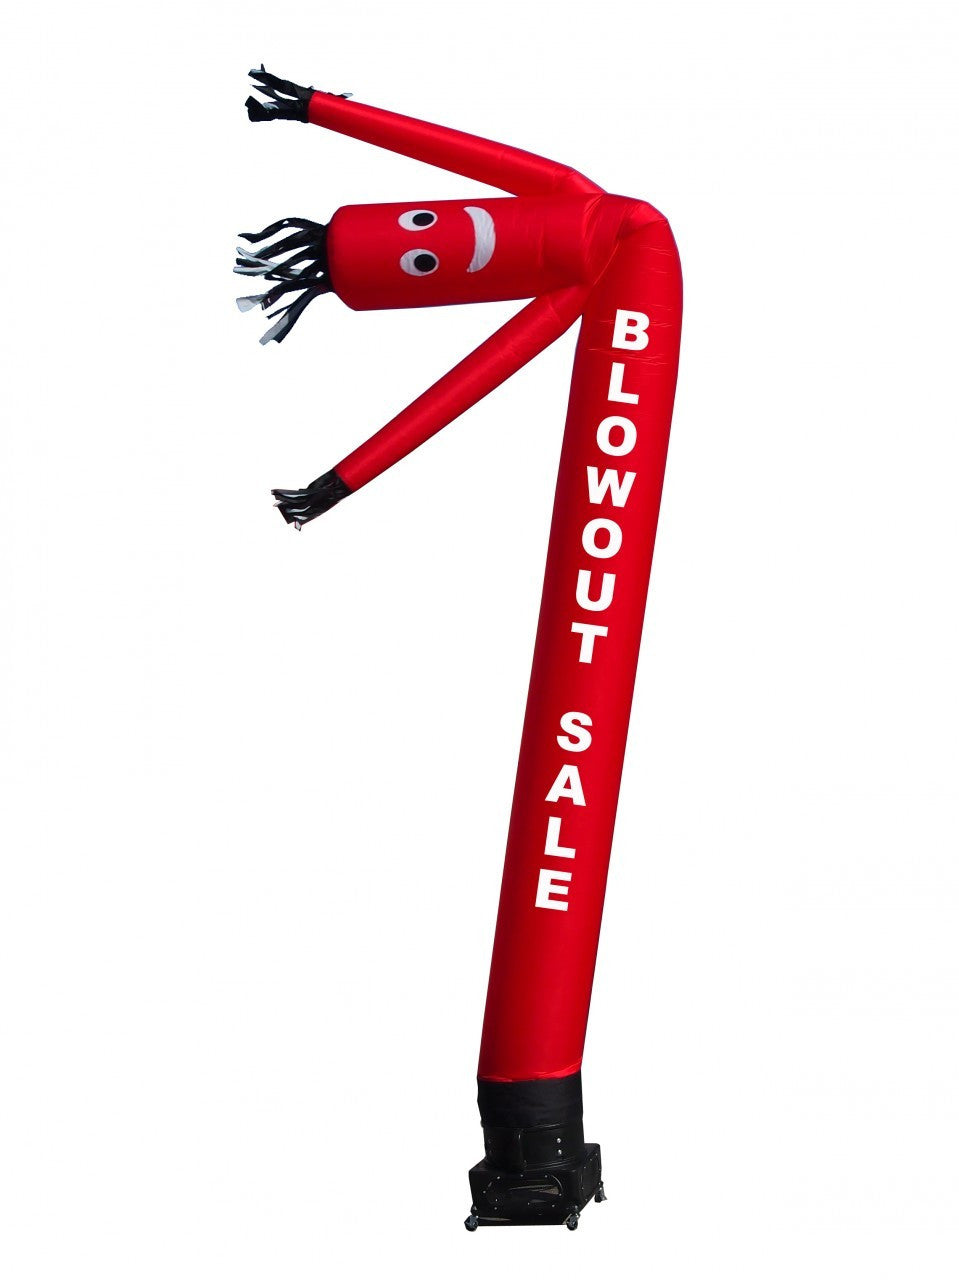 20ft Blowout Sale Red Air Dancer Tube Man Inflatables